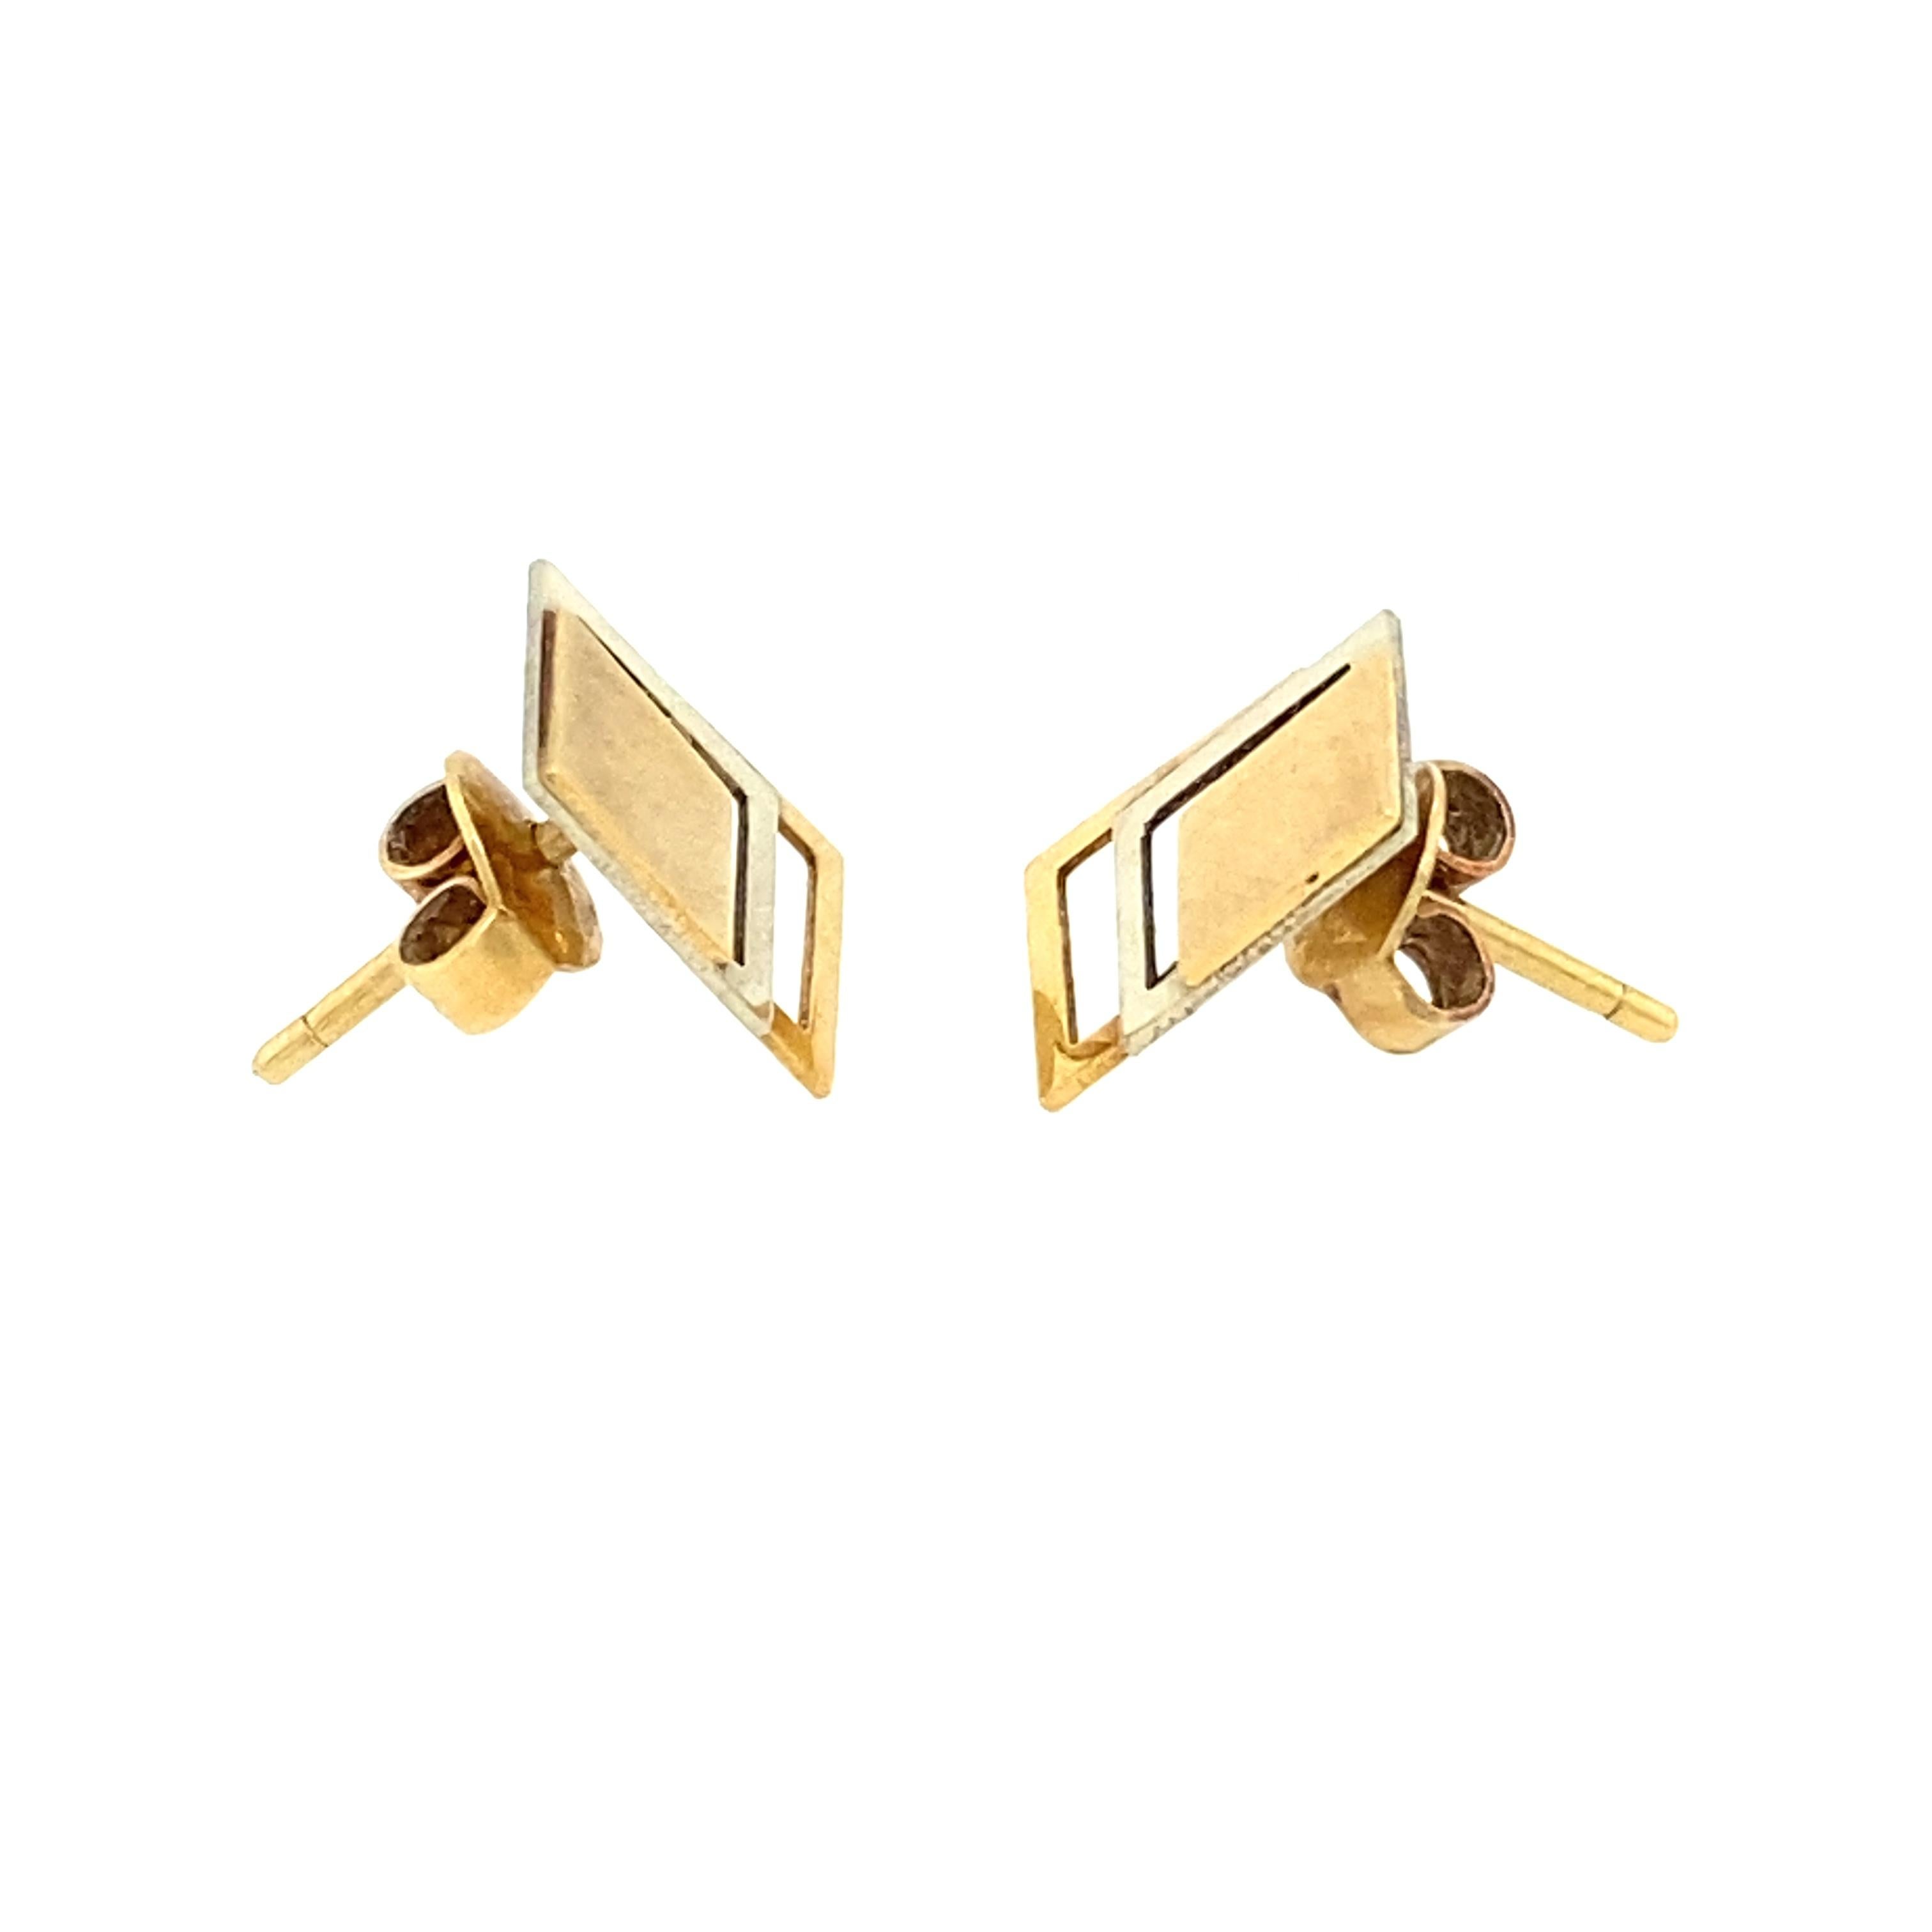 1940s Retro Geometric Shape Earrings, 14 Karat Yellow and White Gold In Excellent Condition For Sale In Atlanta, GA